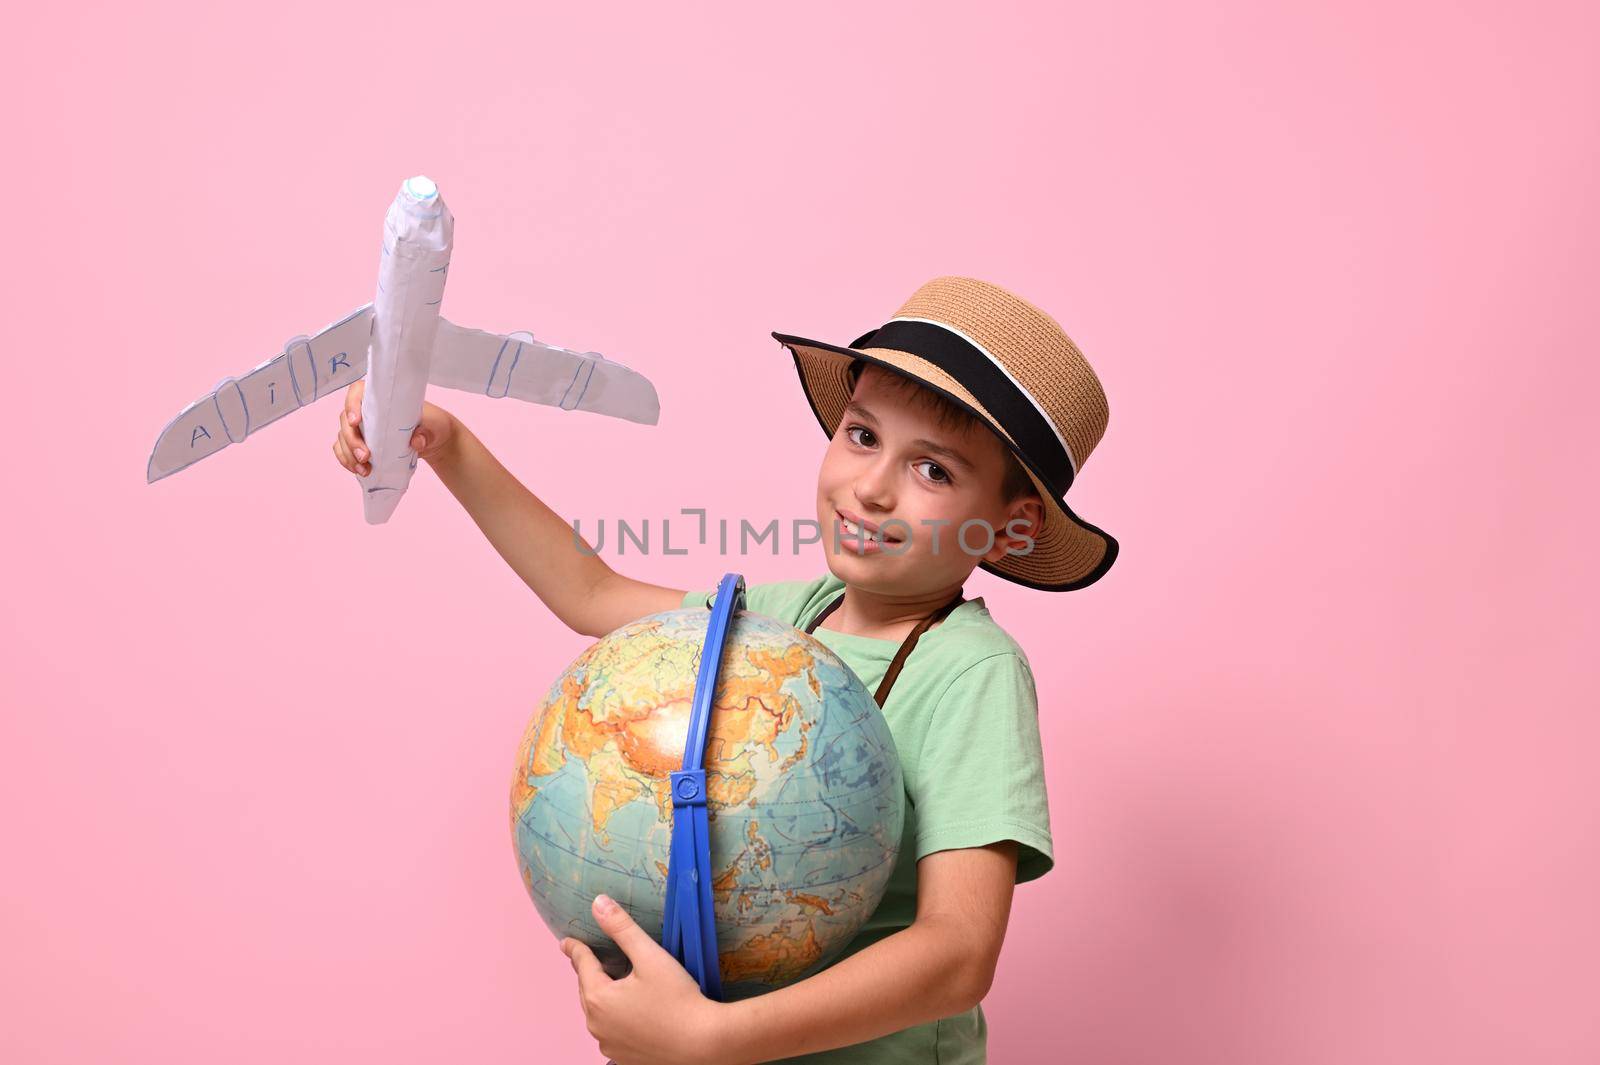 Smiling school boy, tourist, looking at camera while playing with paper airplane and a globe, standing isolated over pink background with copy space. Tourism, travel, geography knowledge concepts